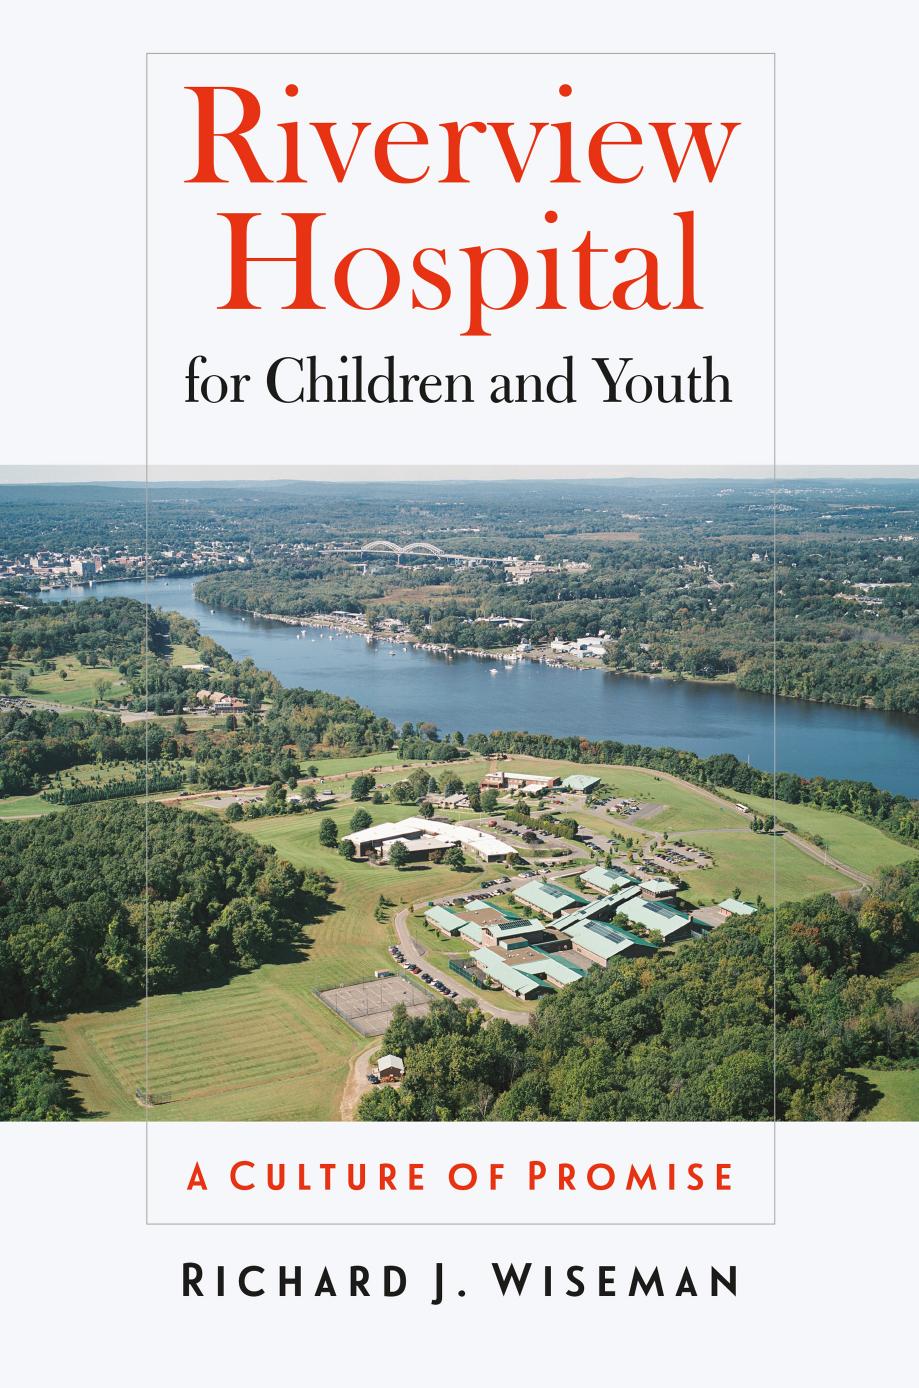 Riverview Hospital for Children and Youth: A Culture of Promise by Richard J. Wiseman